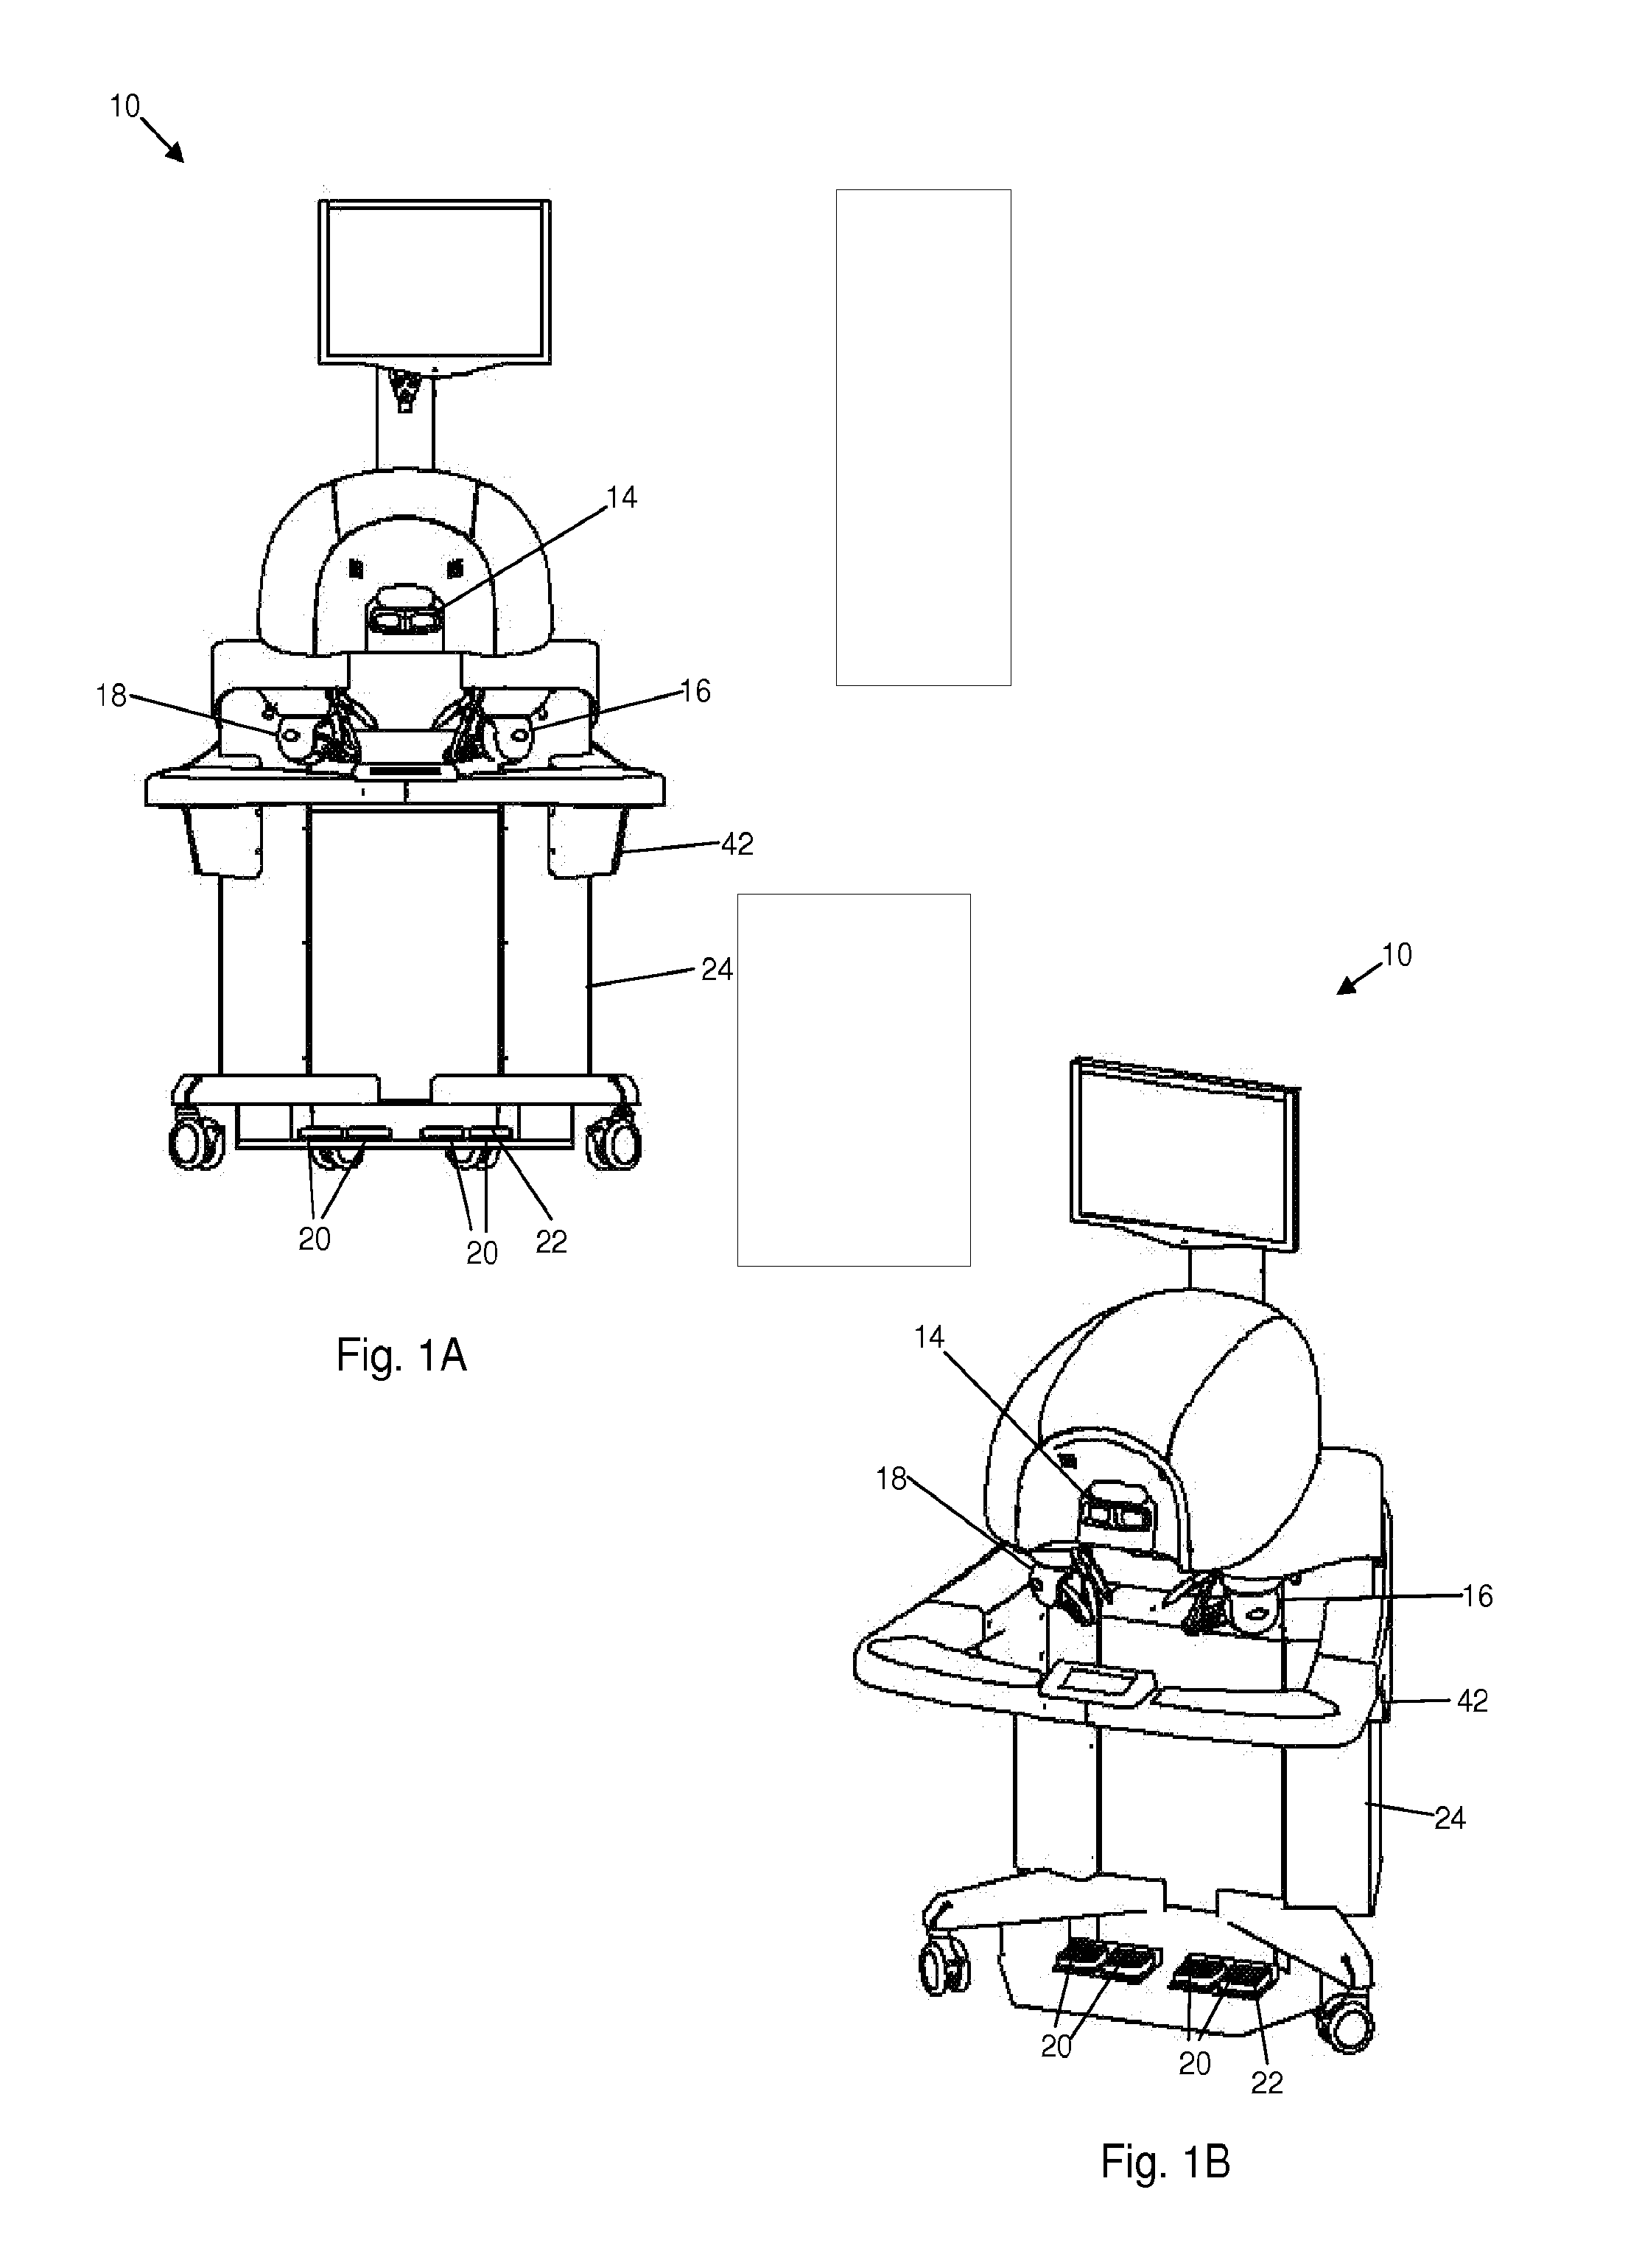 Method and System for Automatic Tool Position Determination for Minimally-Invasive Surgery Training